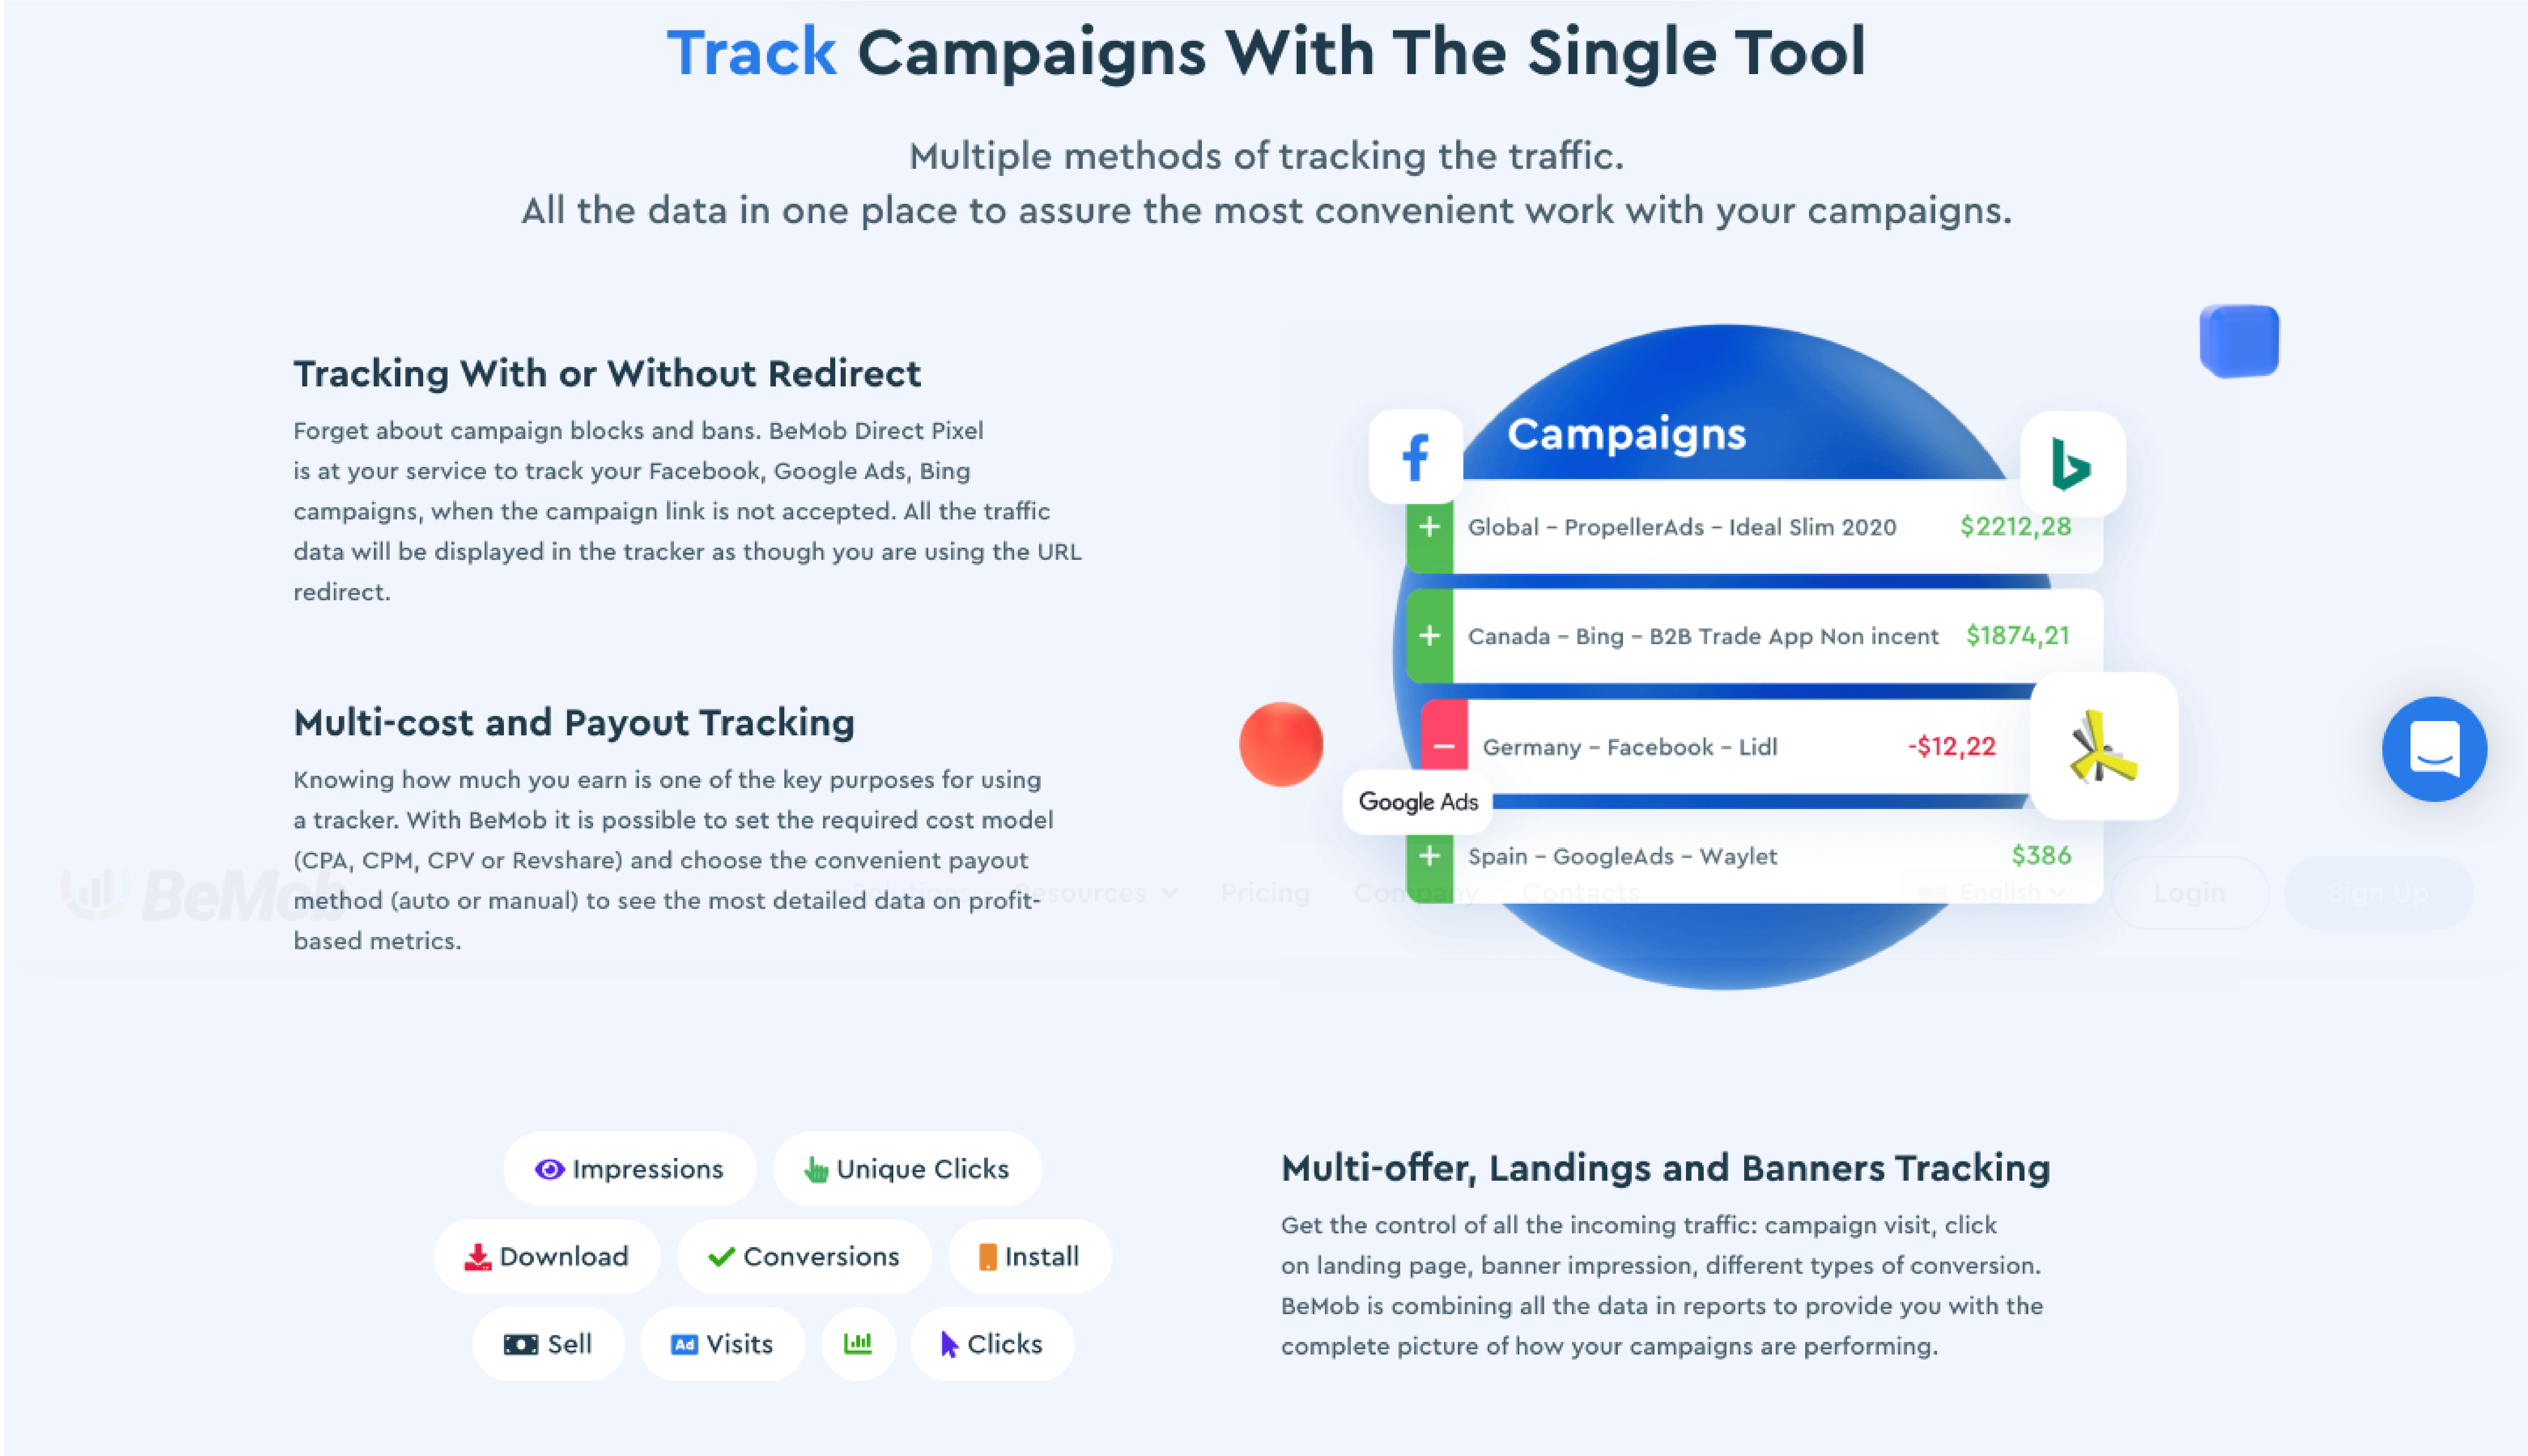 Track Campaigns With The Single Tool Multiple methods of tracking the traffic. All the data in one place to assure the most convenient work with your campaigns.